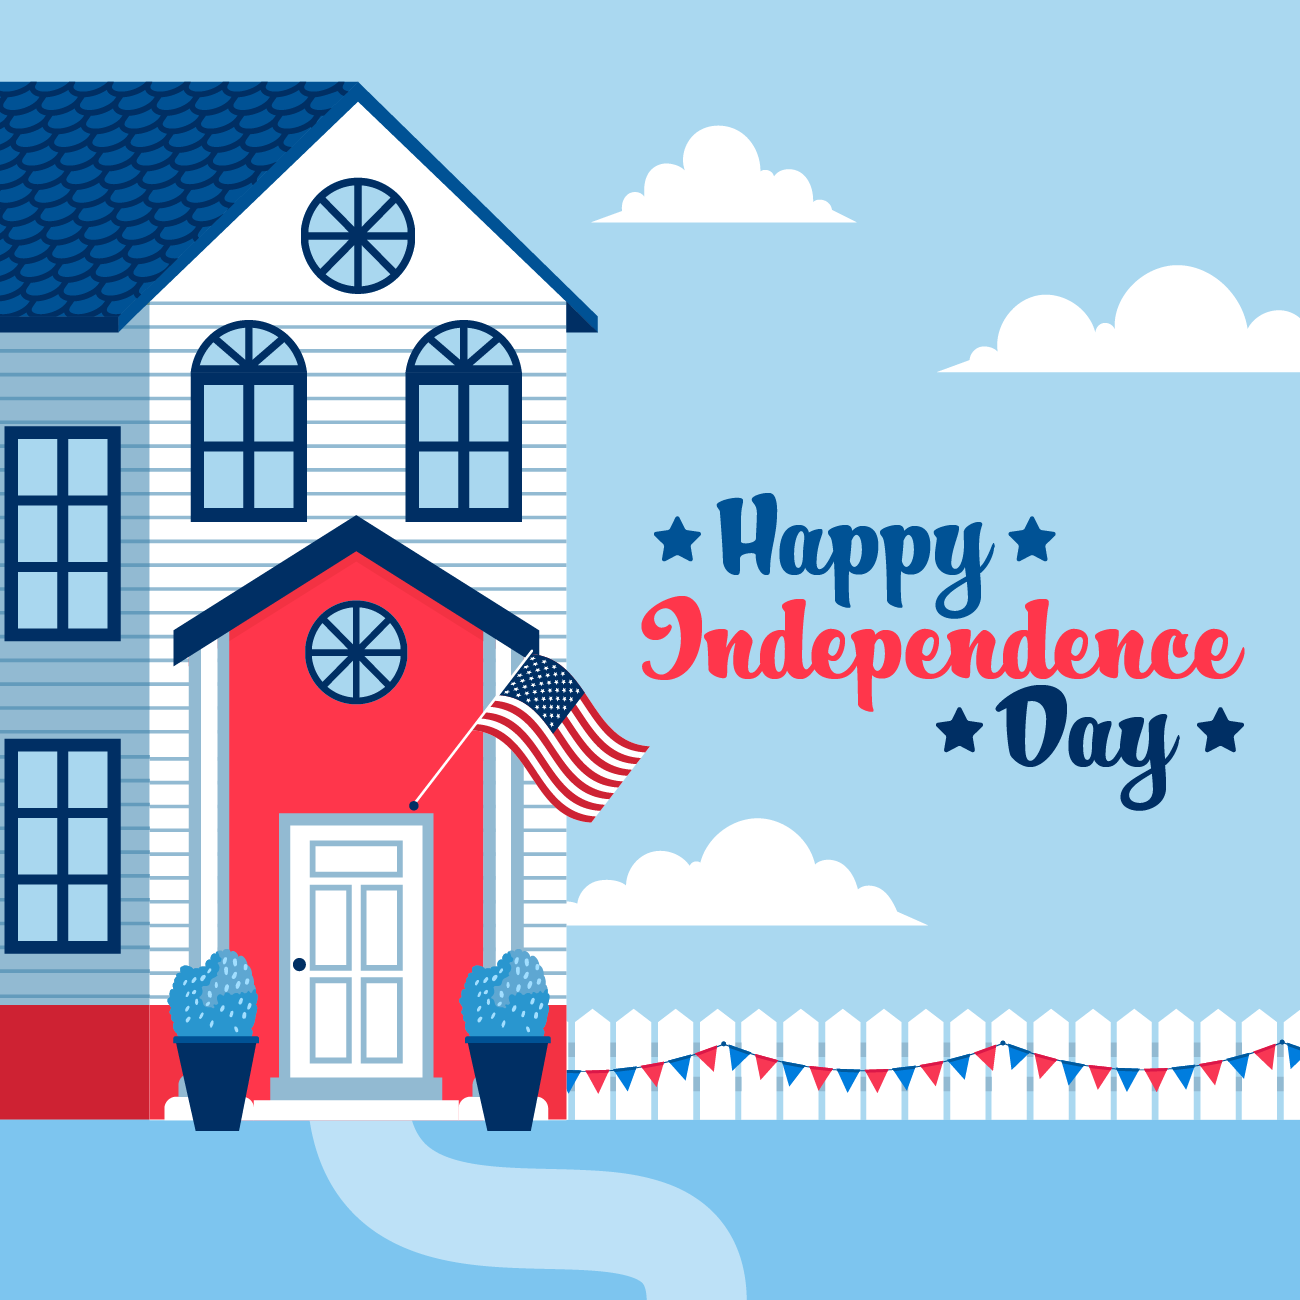 Happy Independence Day | Keeping Current Matters